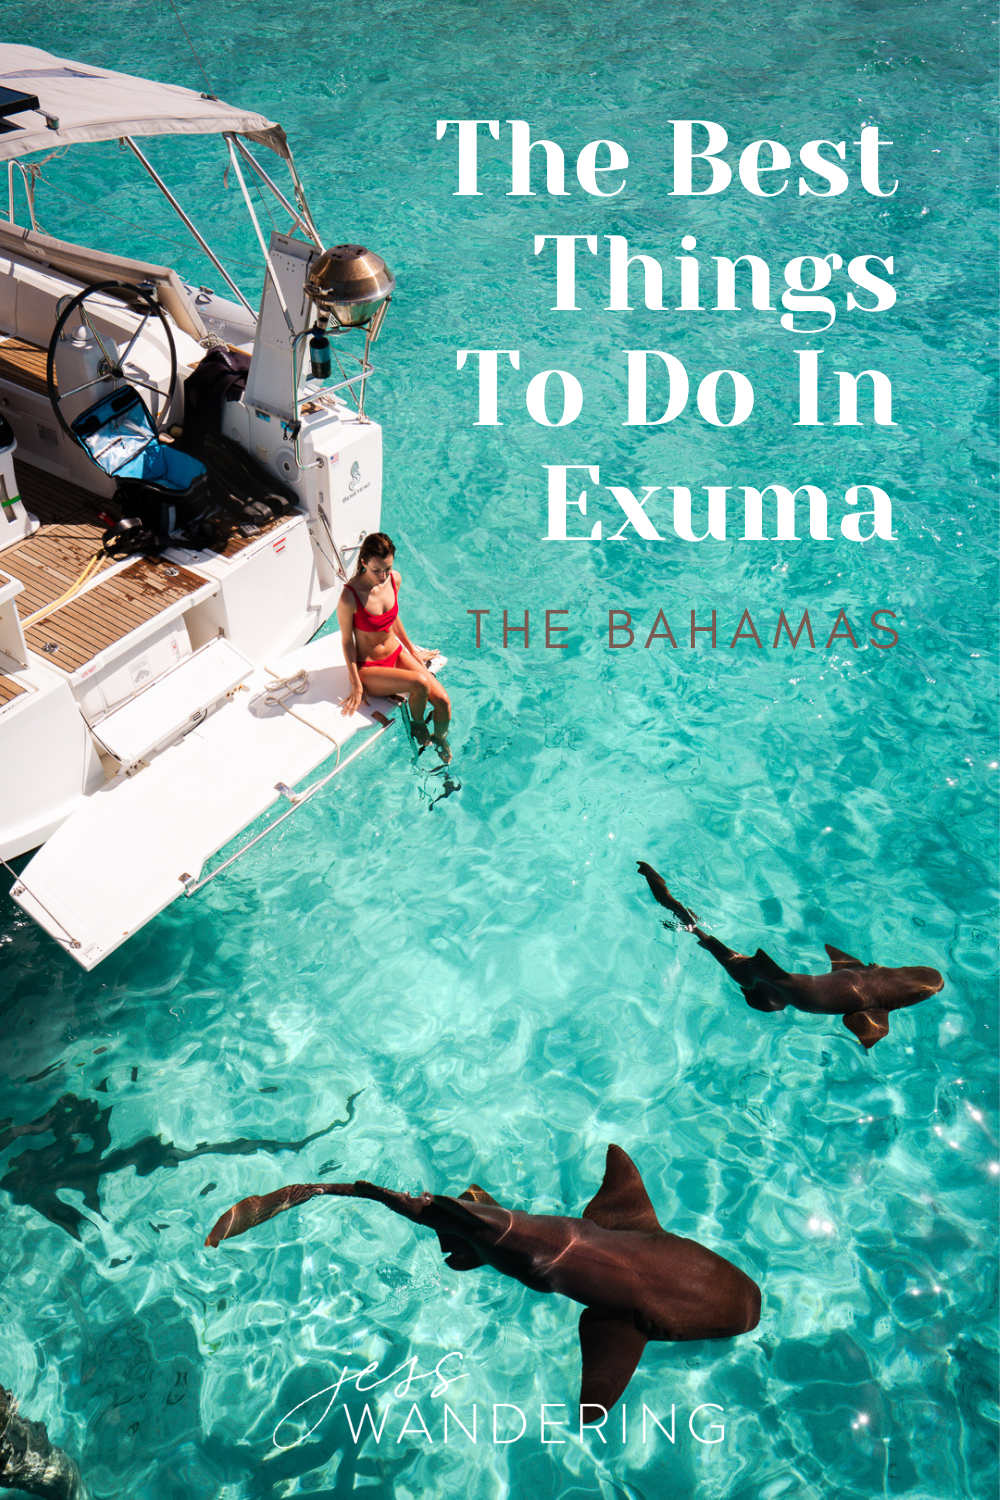 The best things to do in the Exuma, Bahamas.